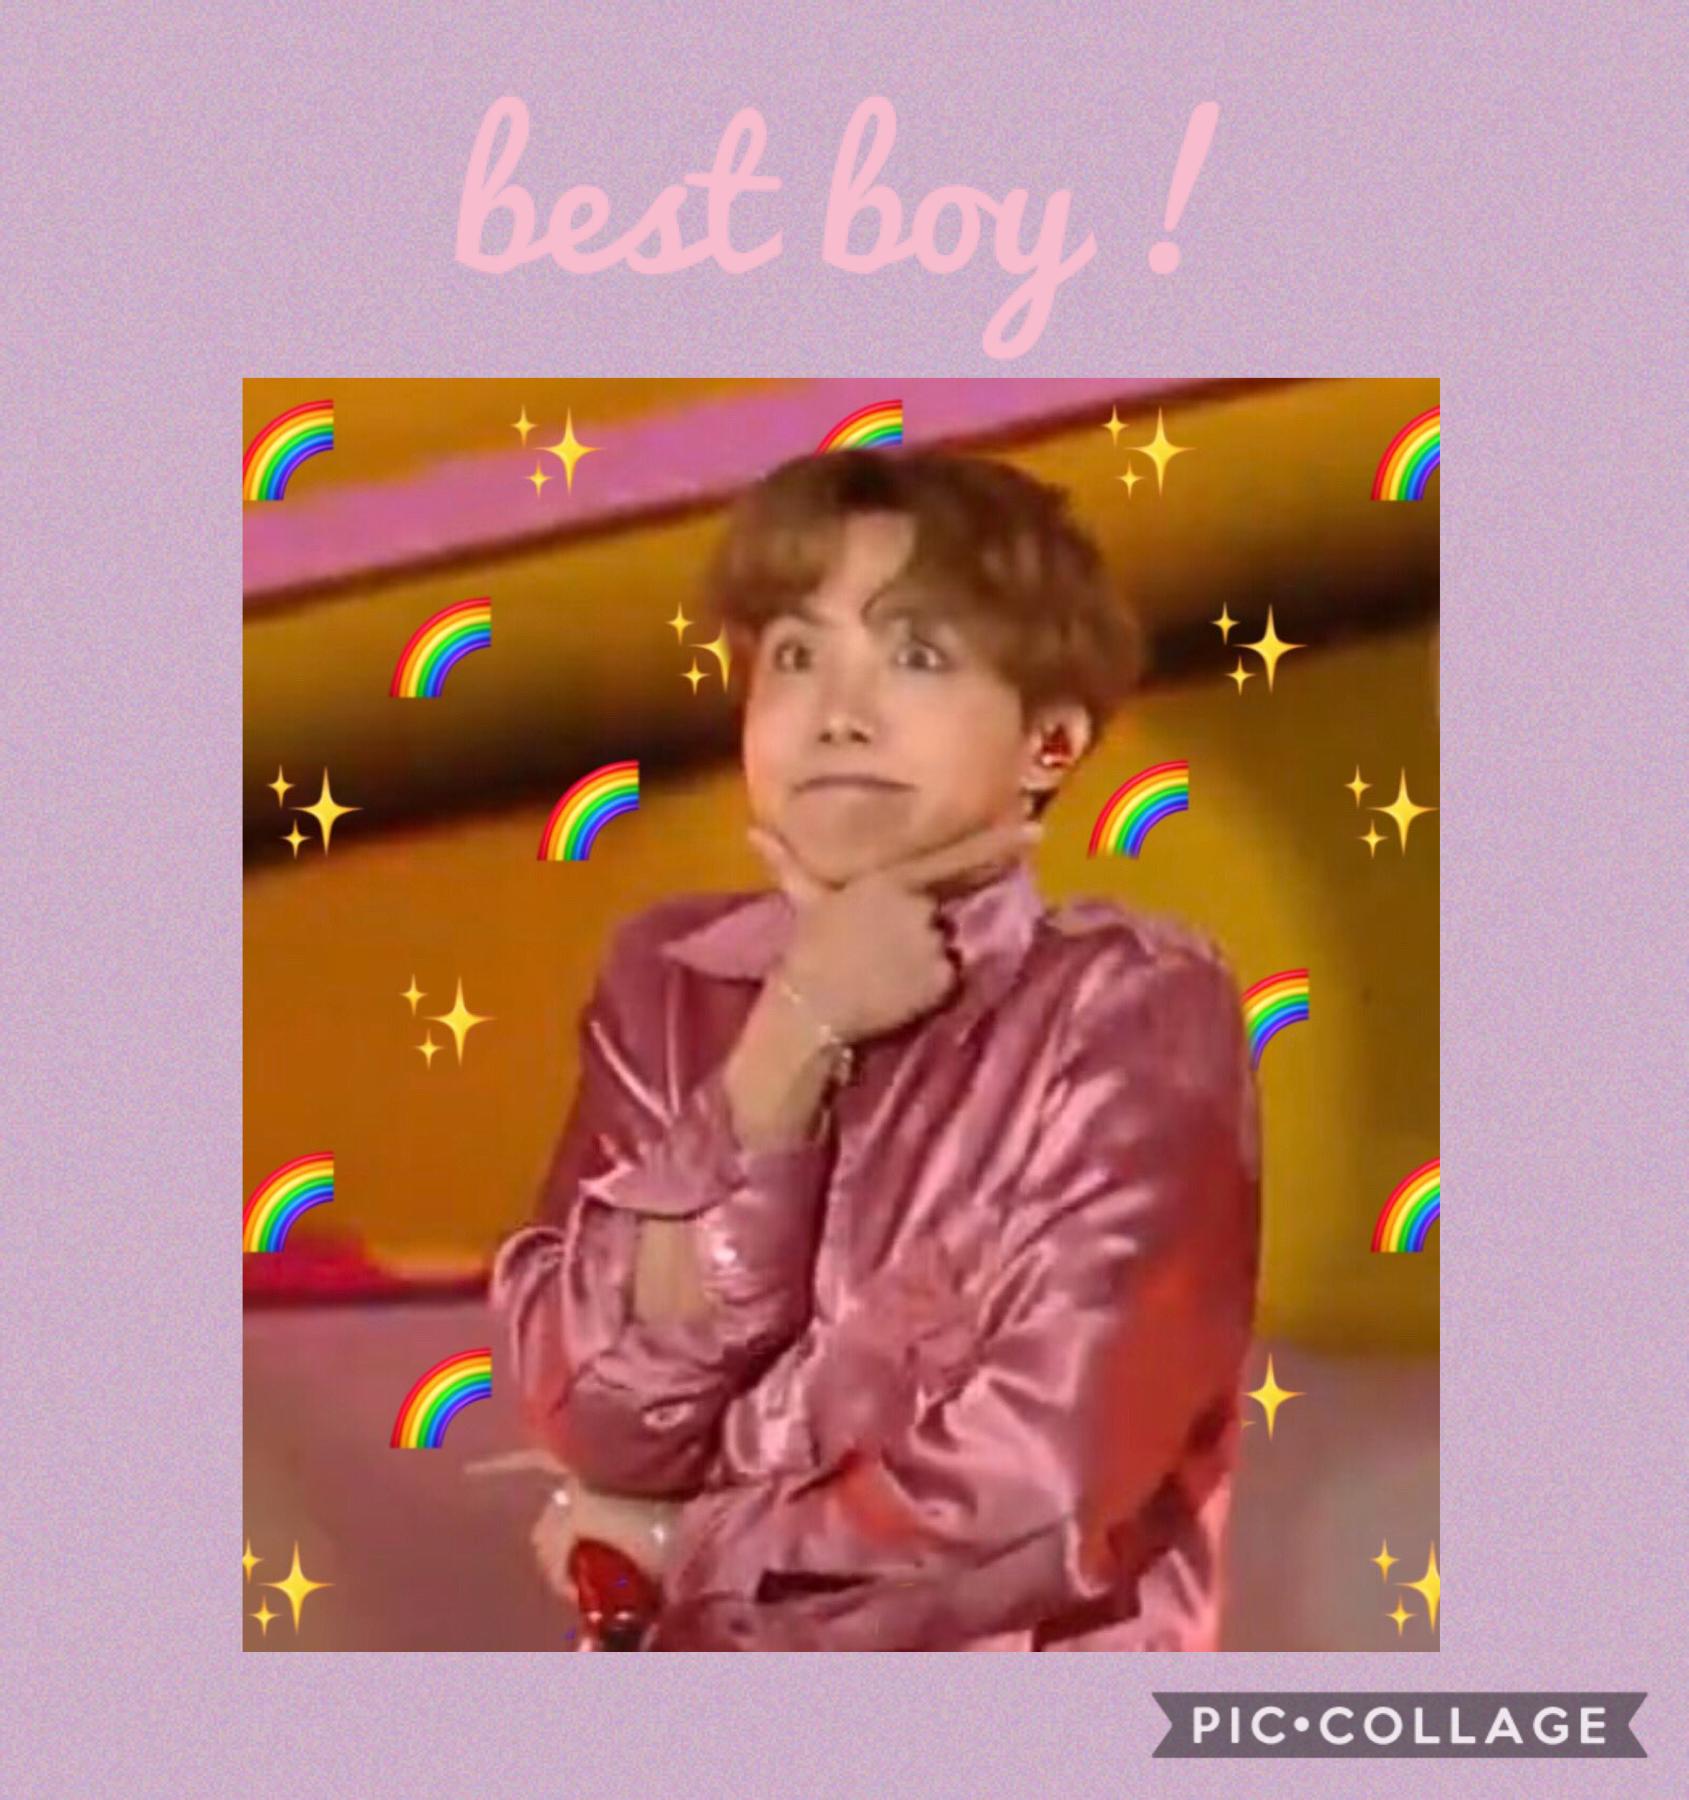 hello pic collage i never go on here and i can’t pink an aesthetic but happy holidays here’s hobi being best boy 